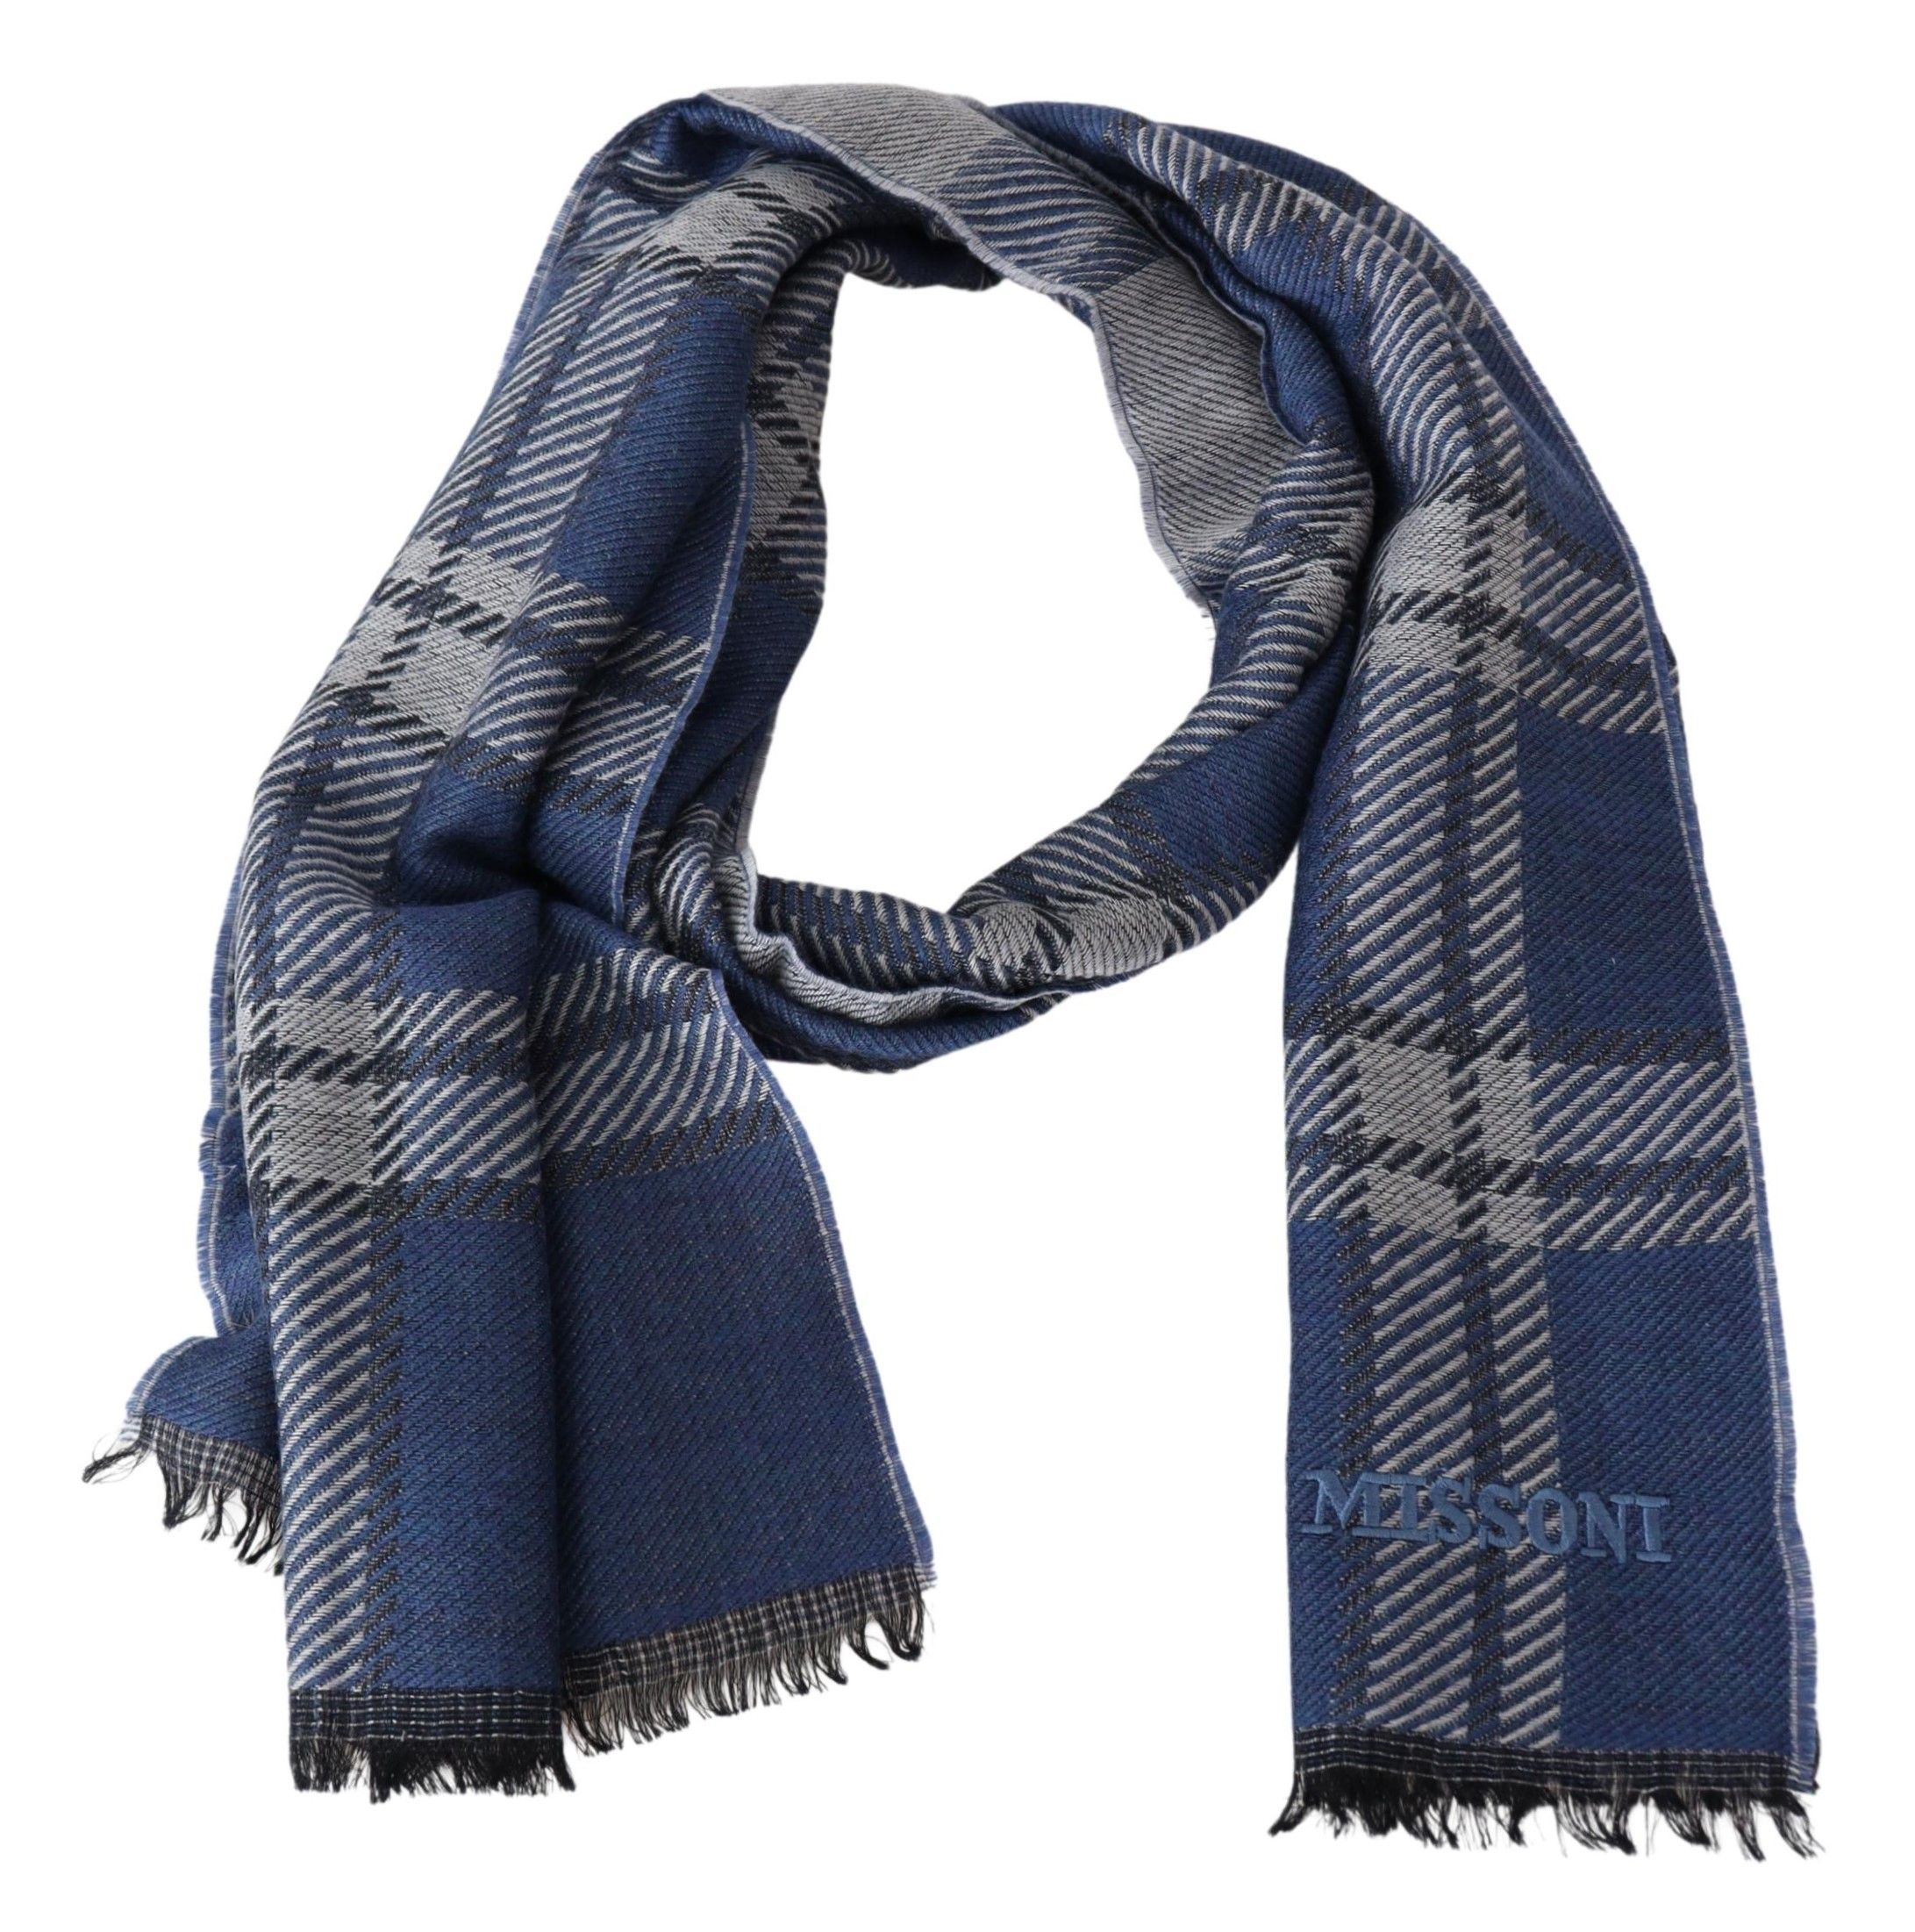 Save 36% Missoni Blue Wool Knit Plaid Unisex Neck Wrap Shawl Scarf Womens Mens Accessories Mens Scarves and mufflers 